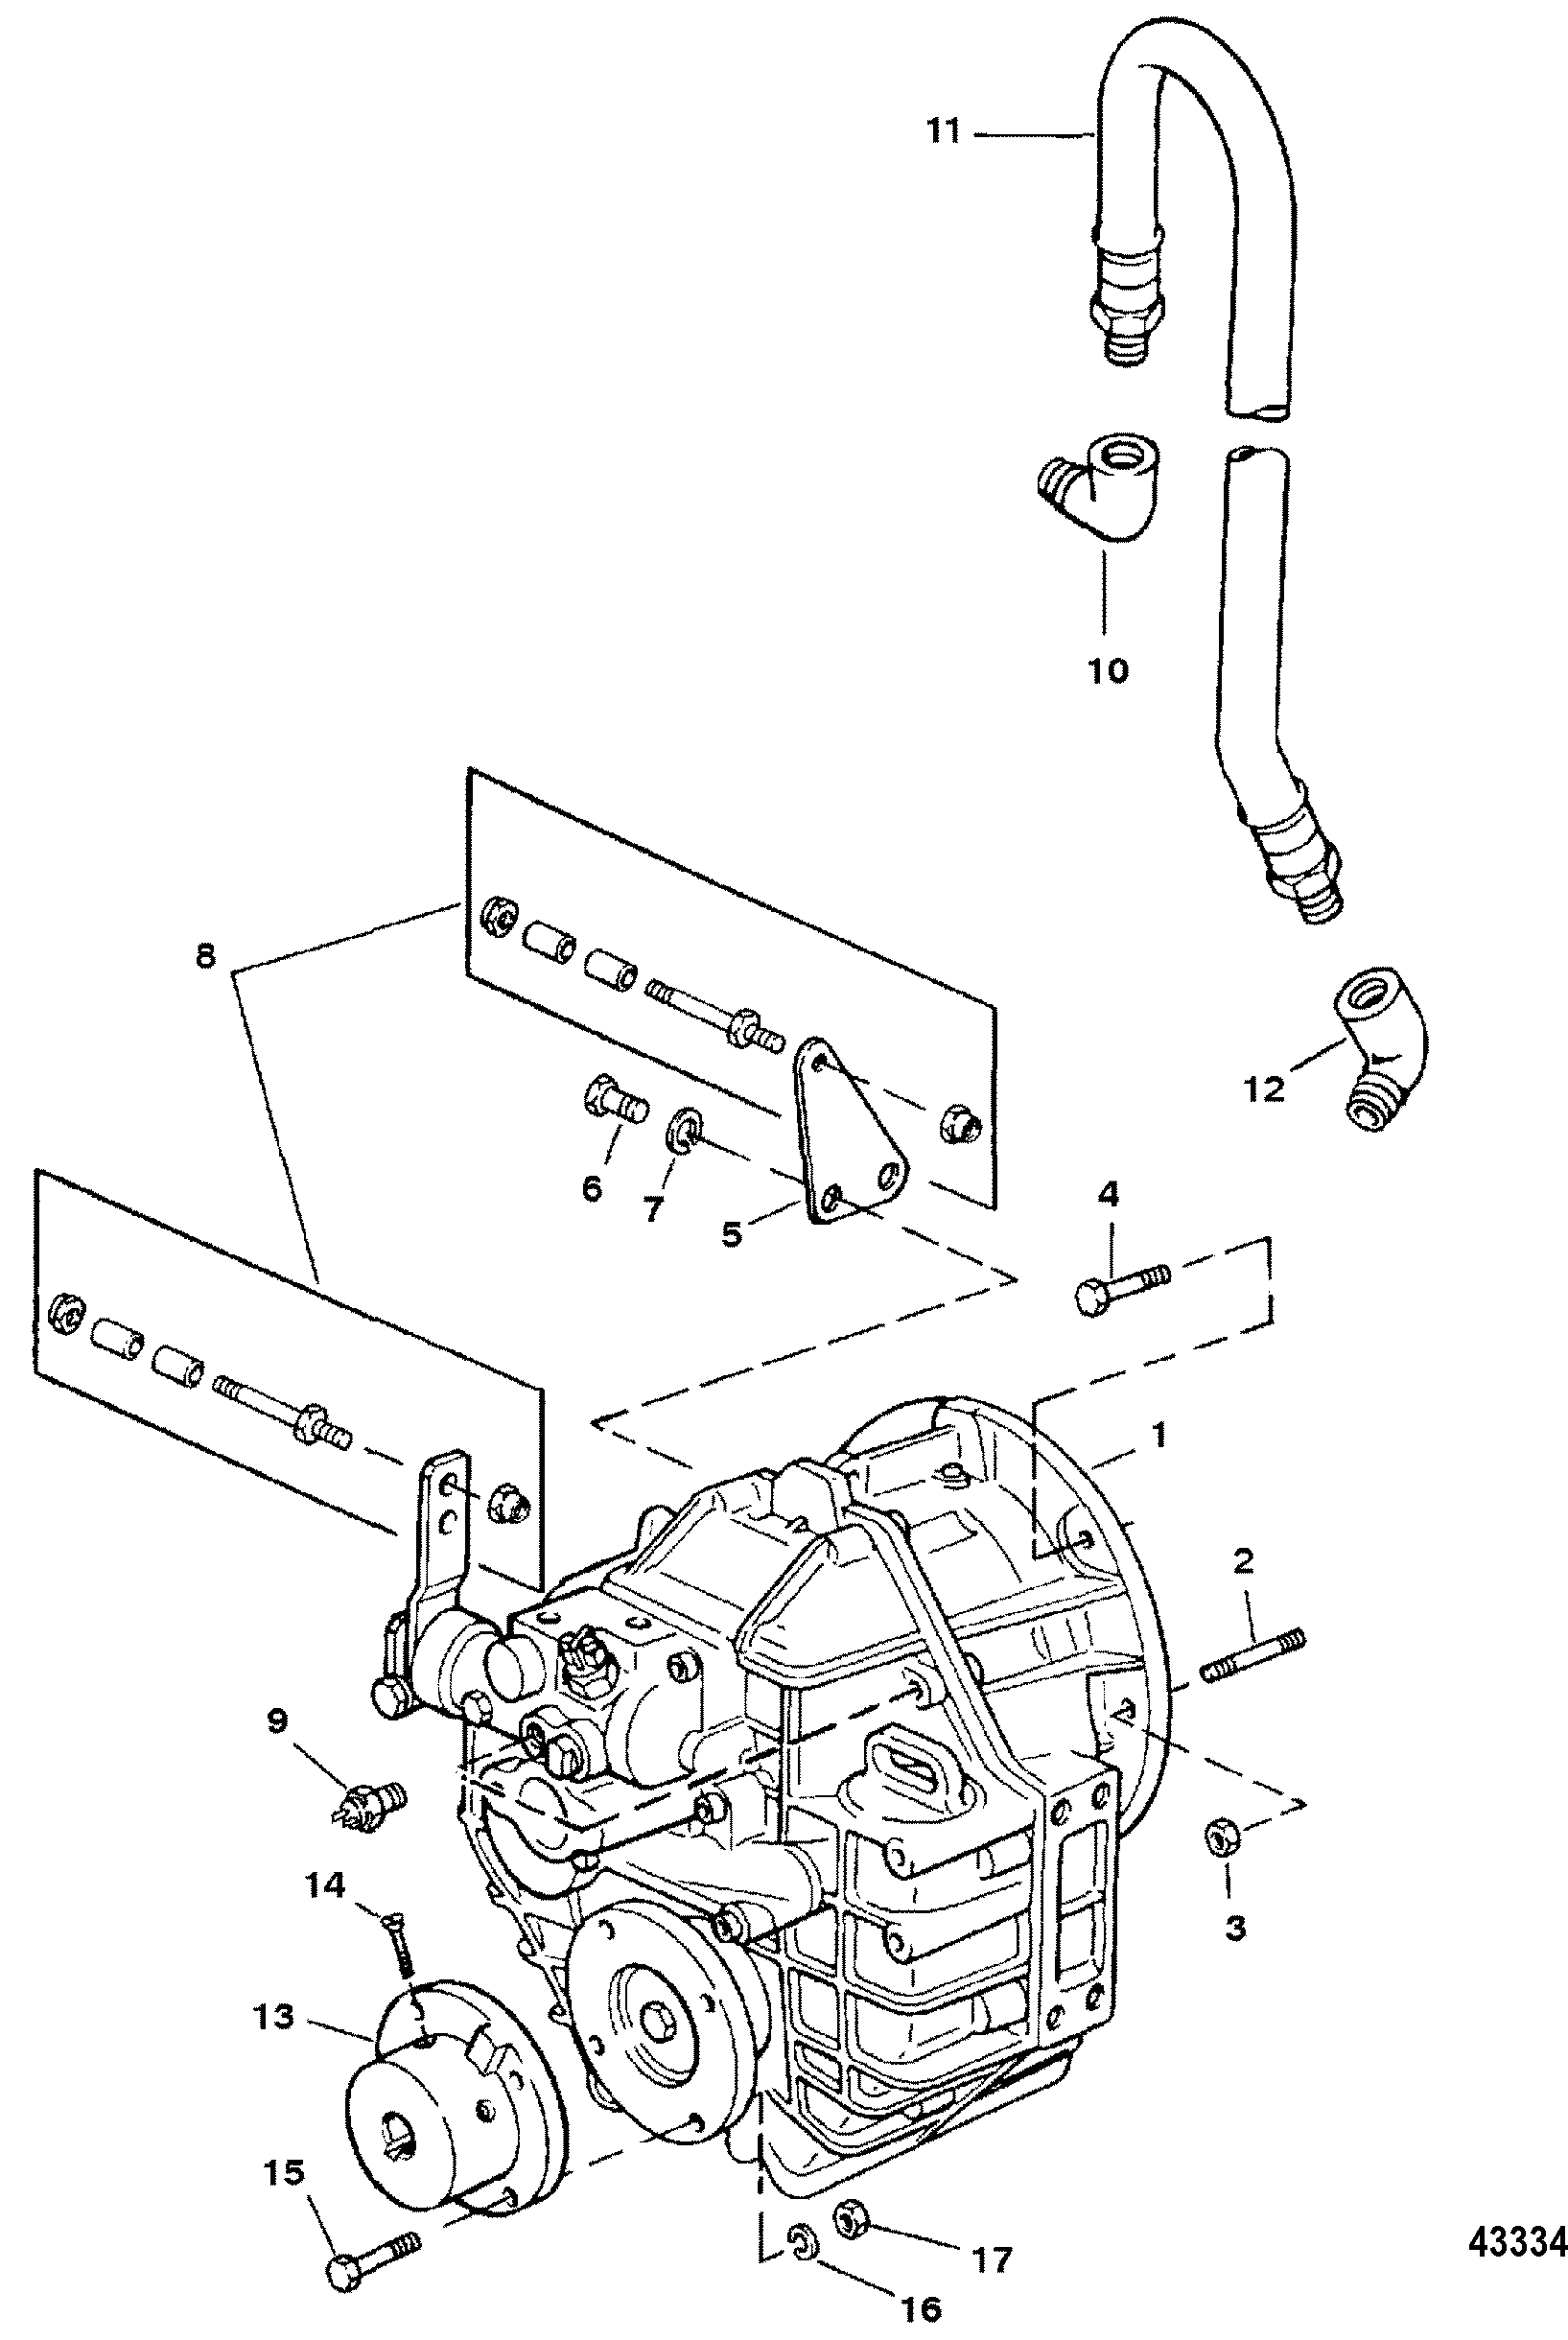 Transmission & Related Parts(Inboard)